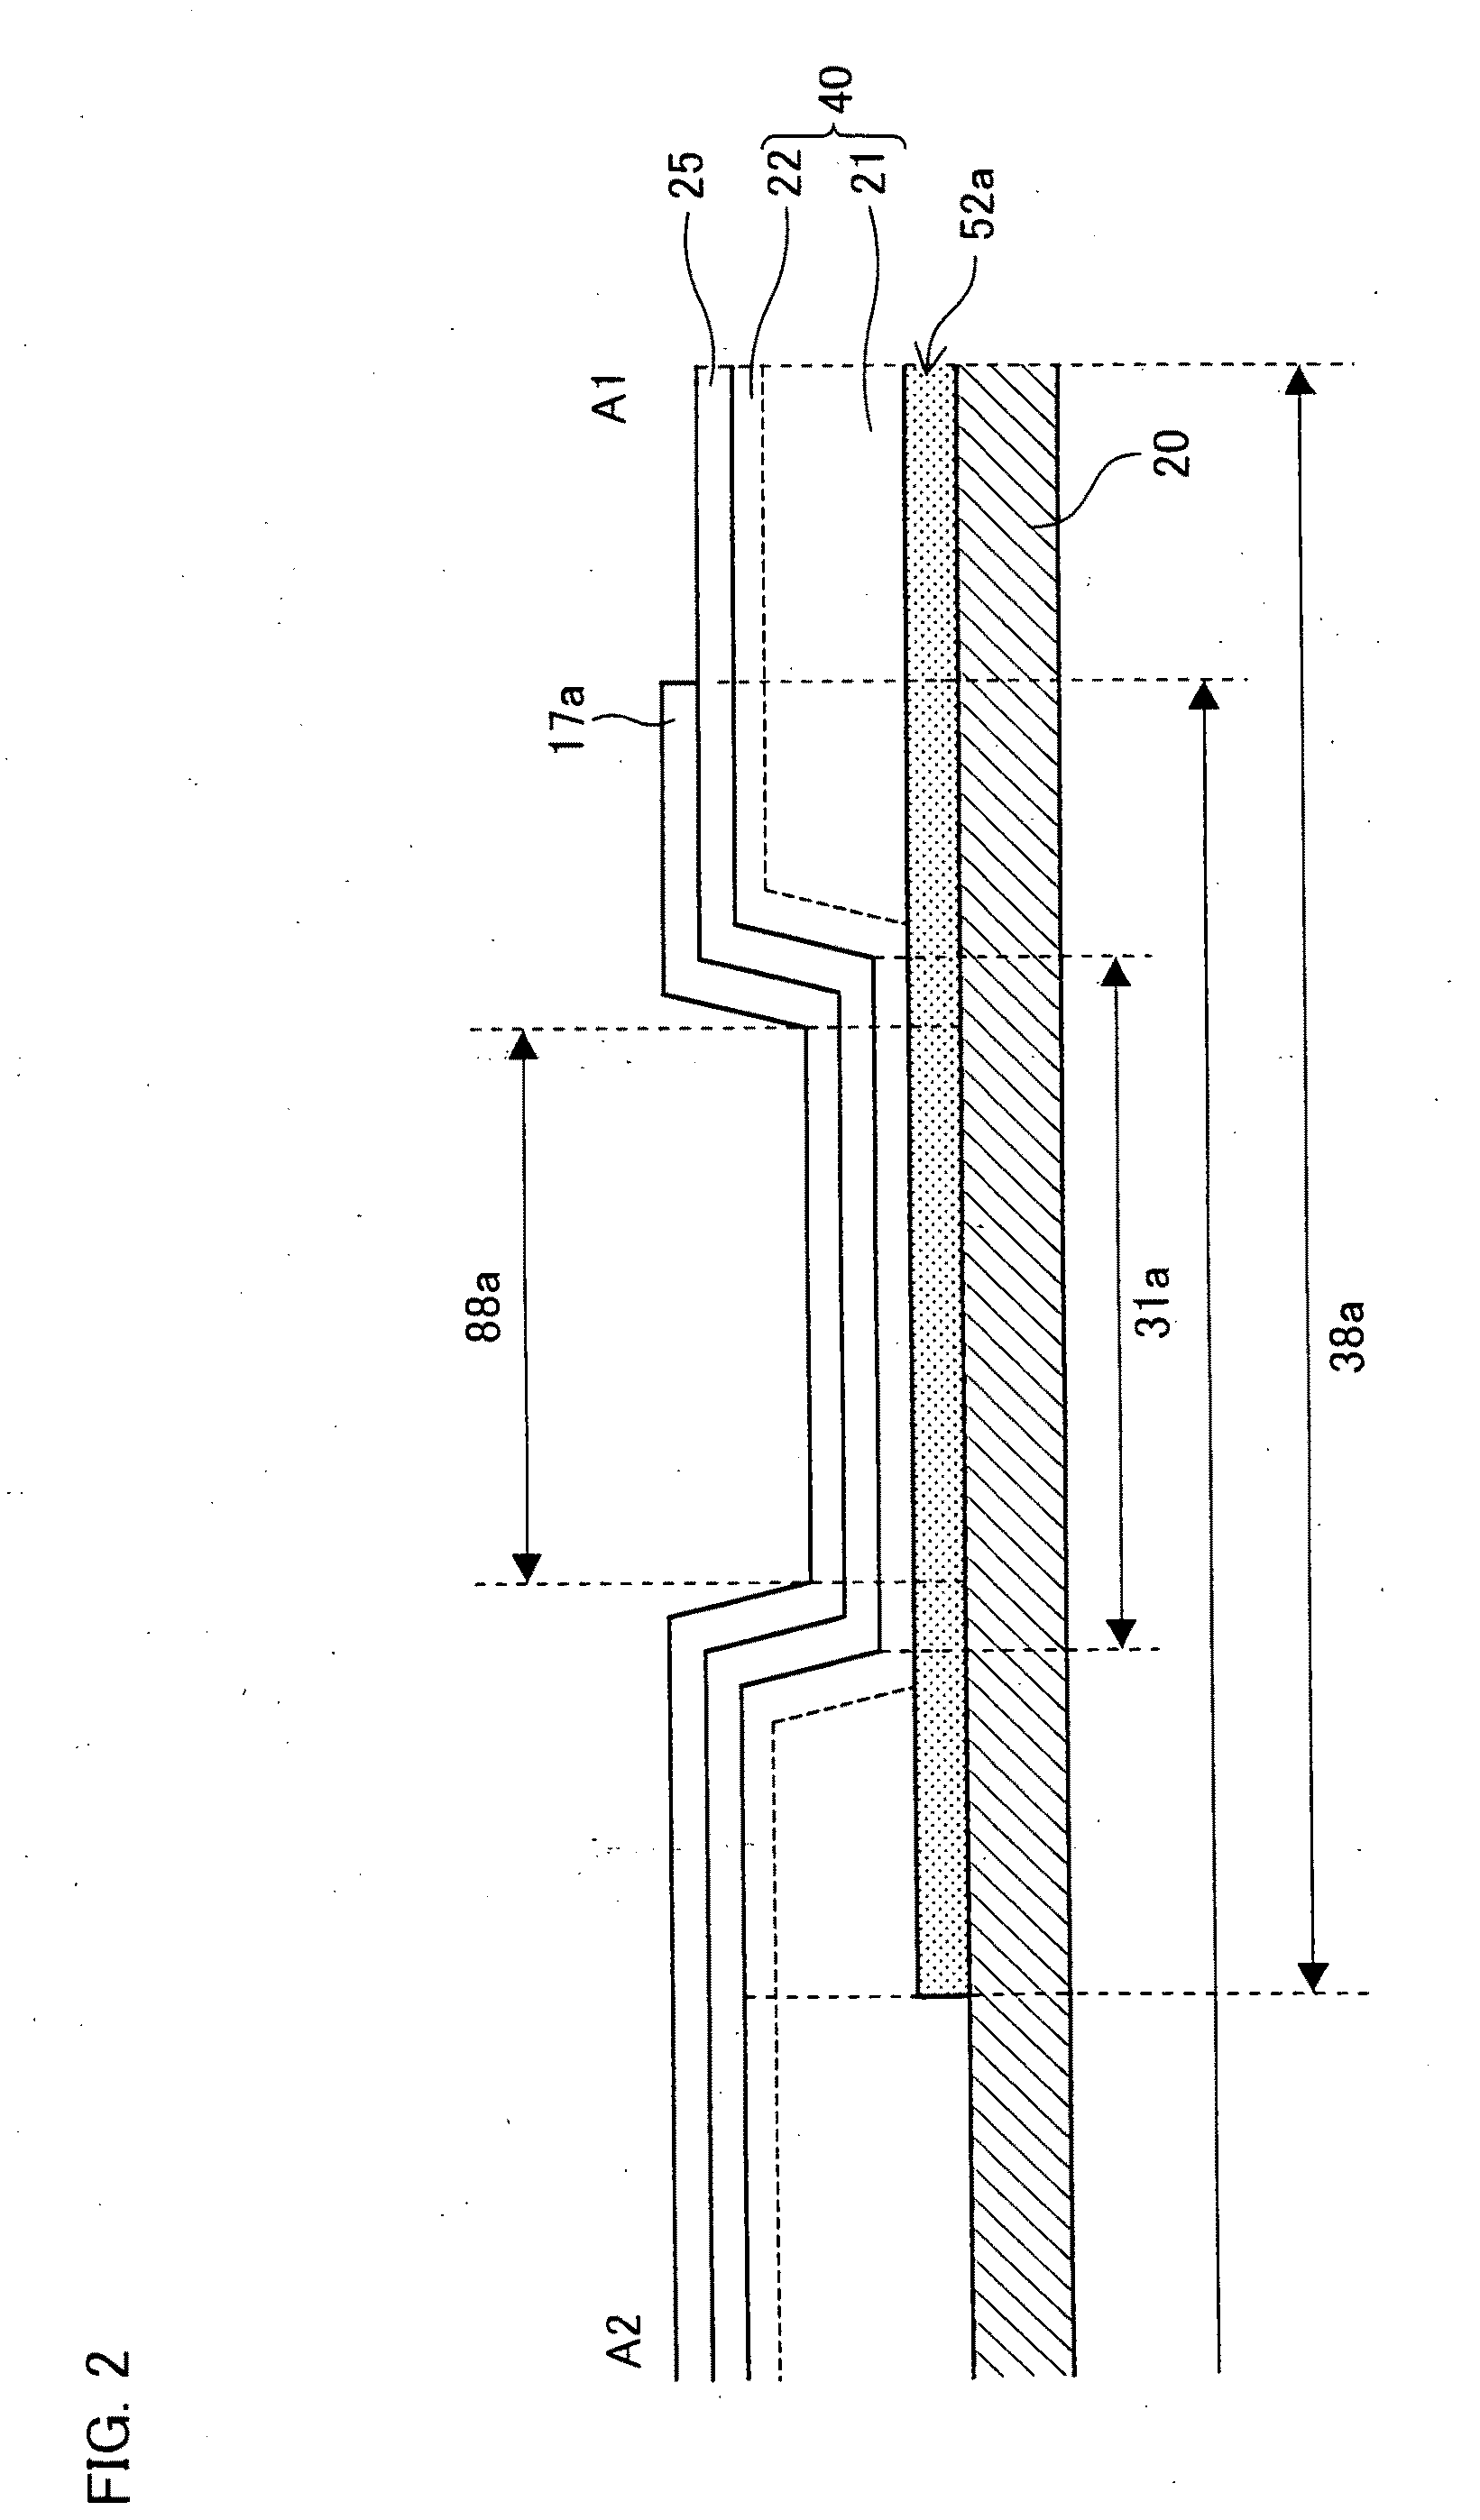 Active Matrix Substrate, Display Apparatus, and Television Receiver